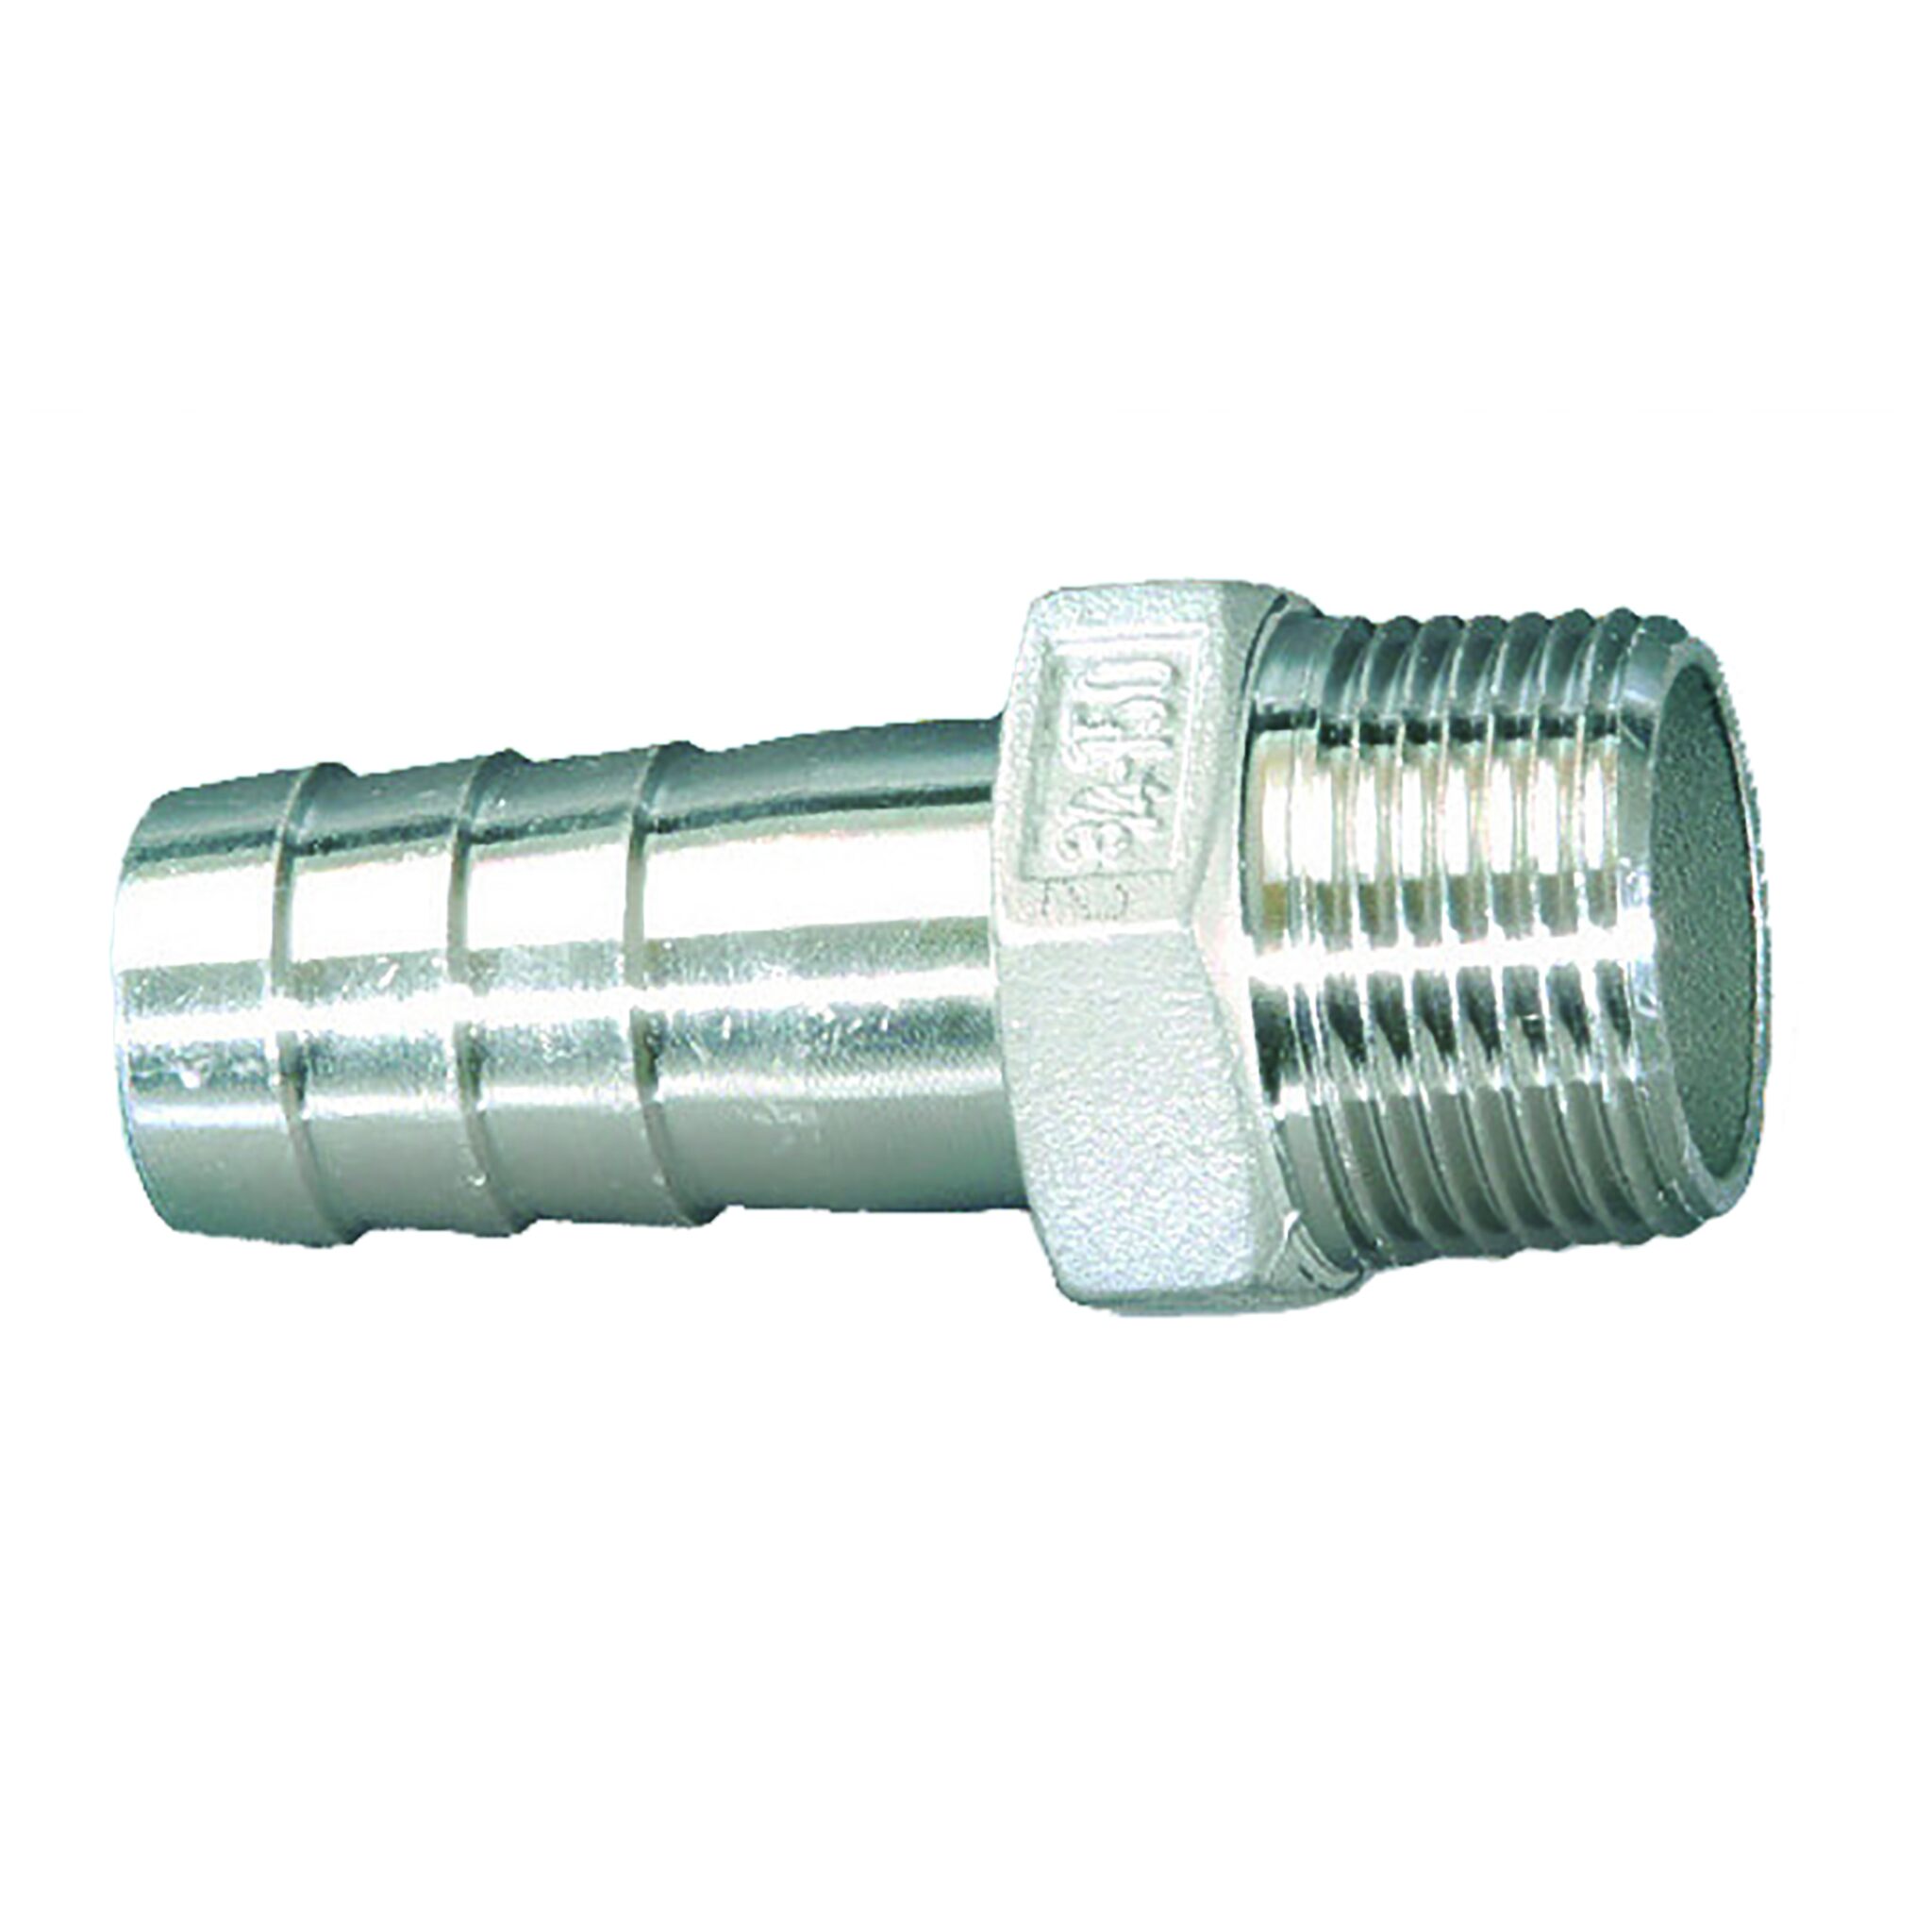 Stainless steel hose nozzle